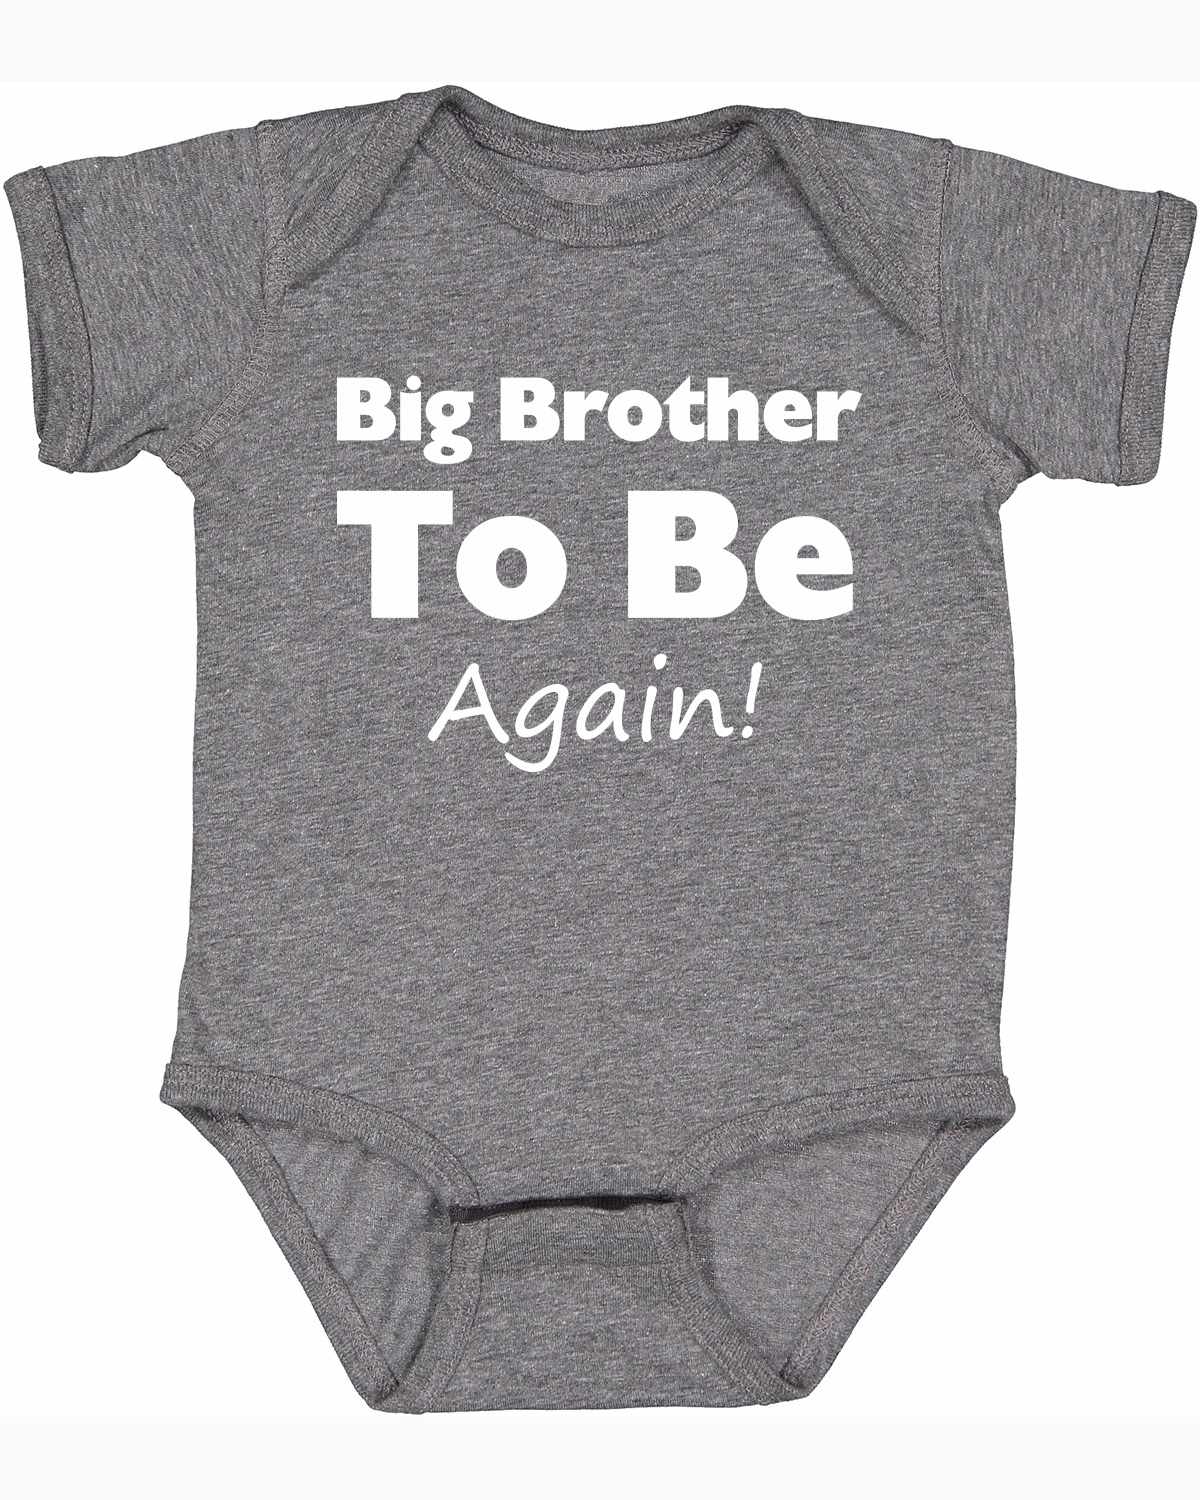 Big Brother To Be Again on Infant BodySuit